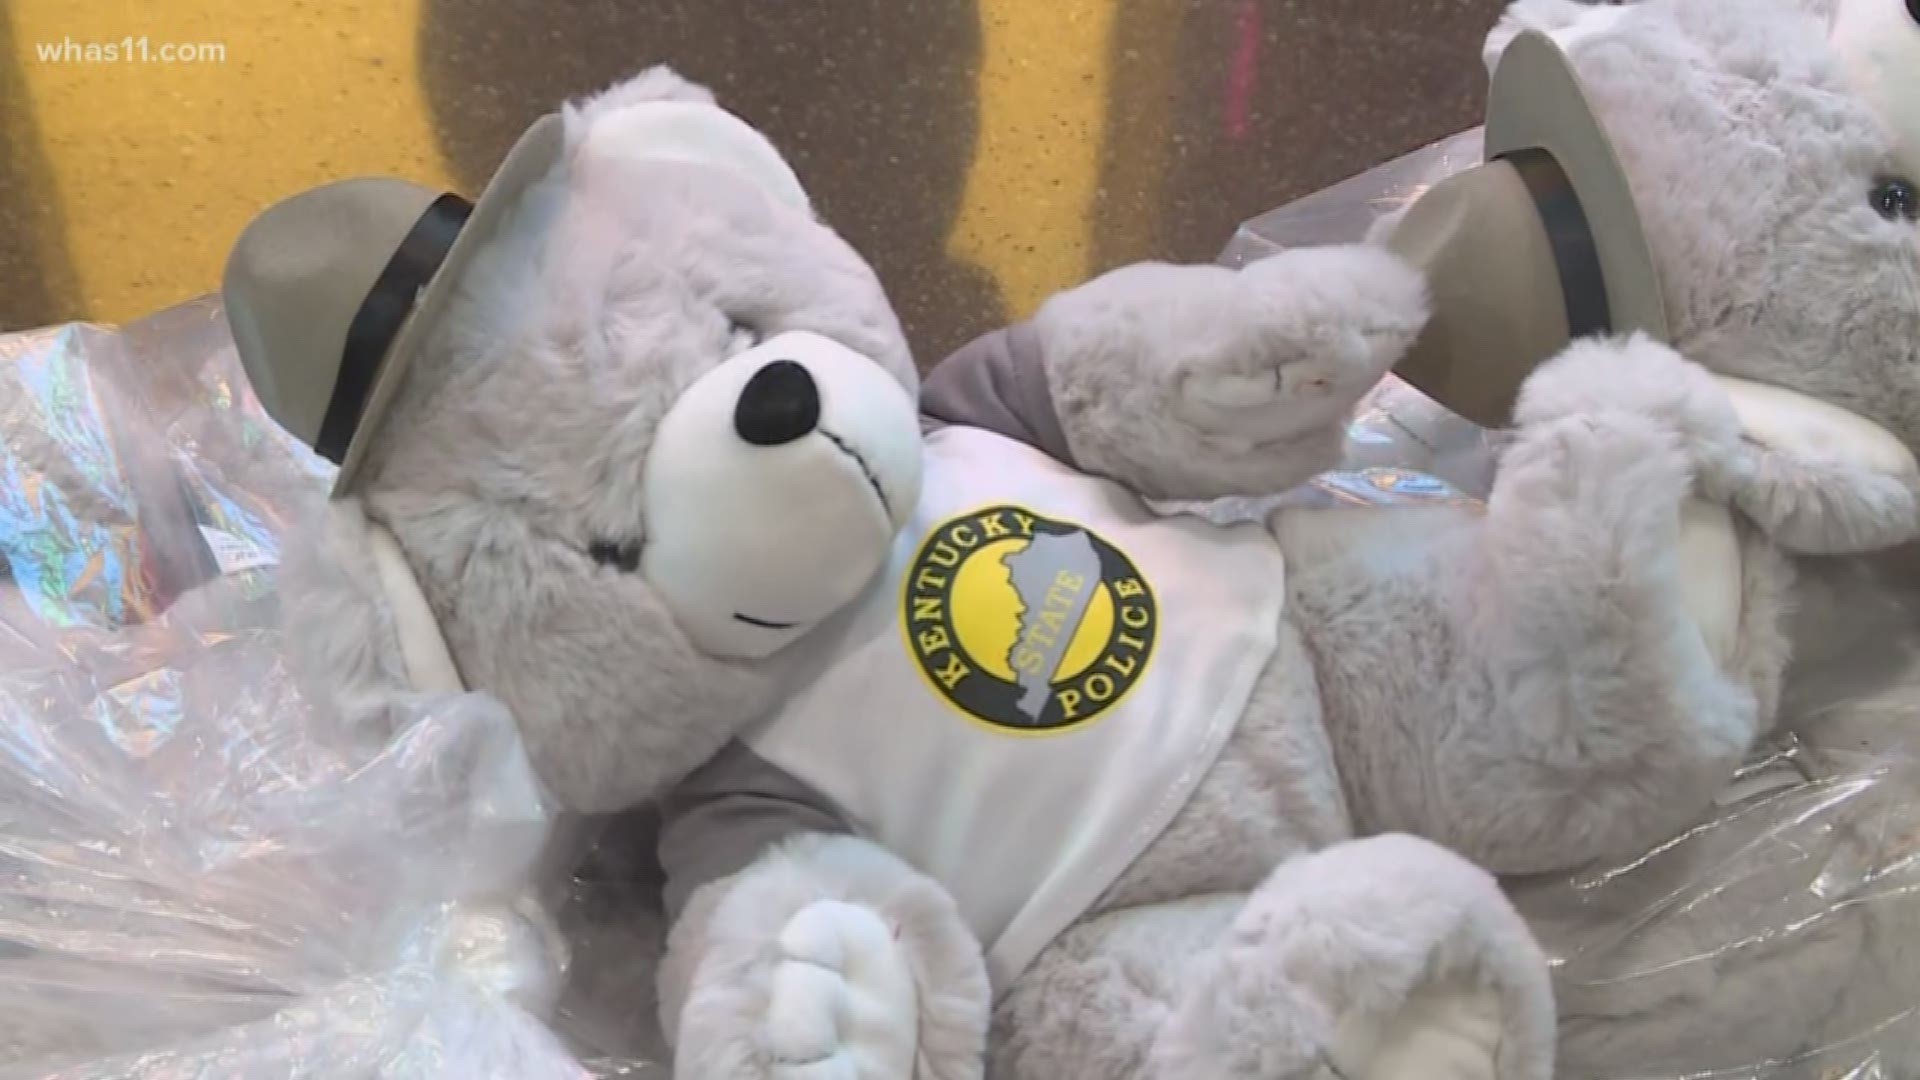 Proceeds from the sale benefit the Trooper Teddy Project, which provides teddy bears to children in traumatic situations